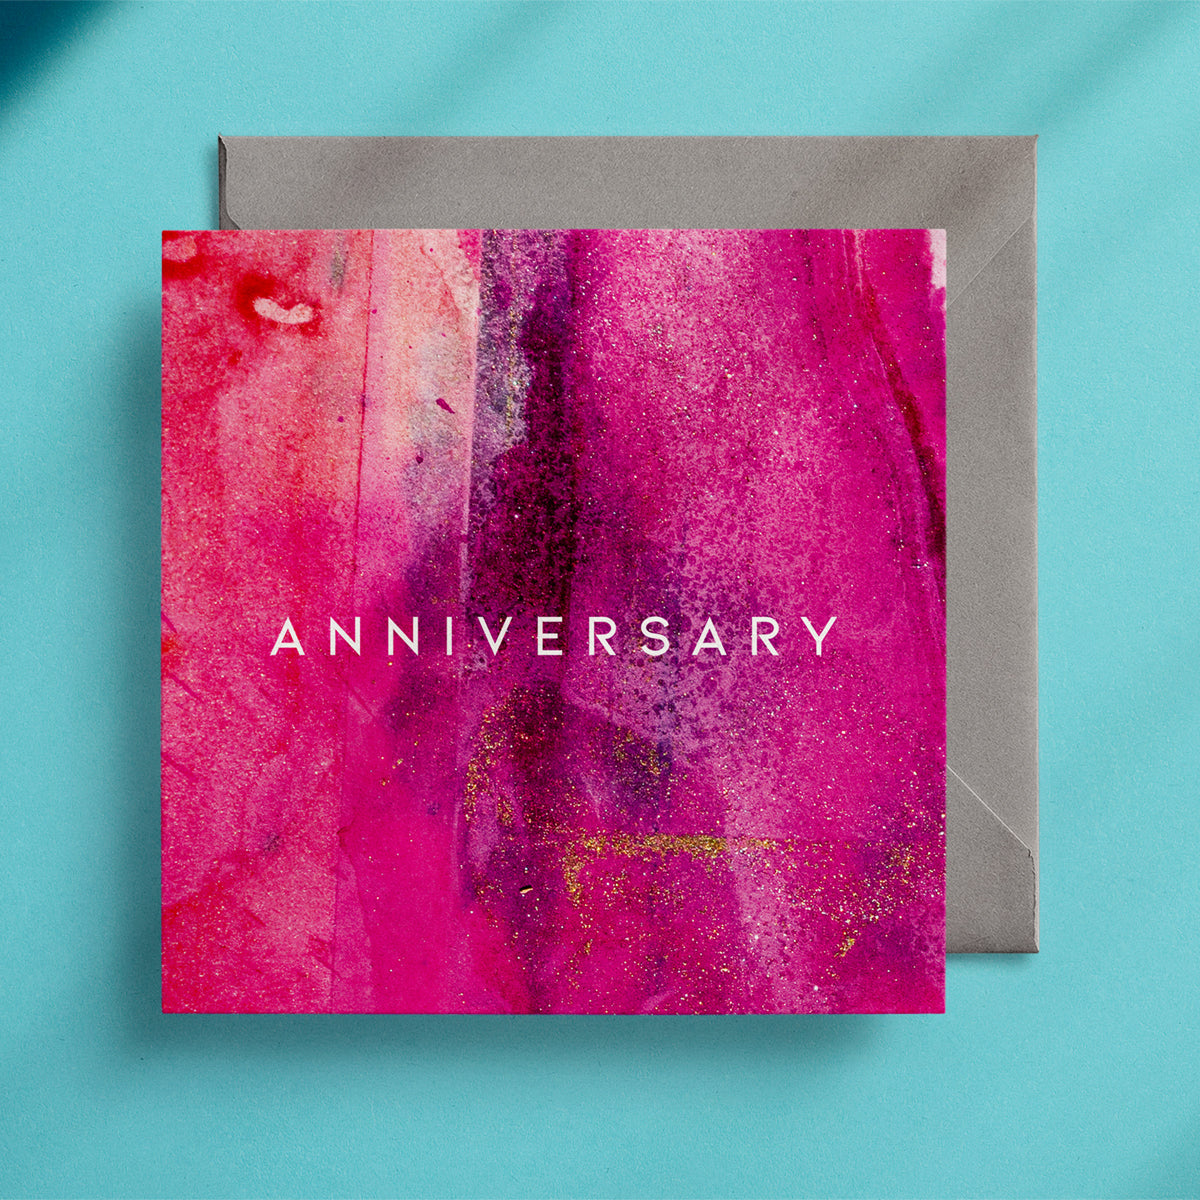 Hot pink Anniversary card with grey envelope on a turquoise background